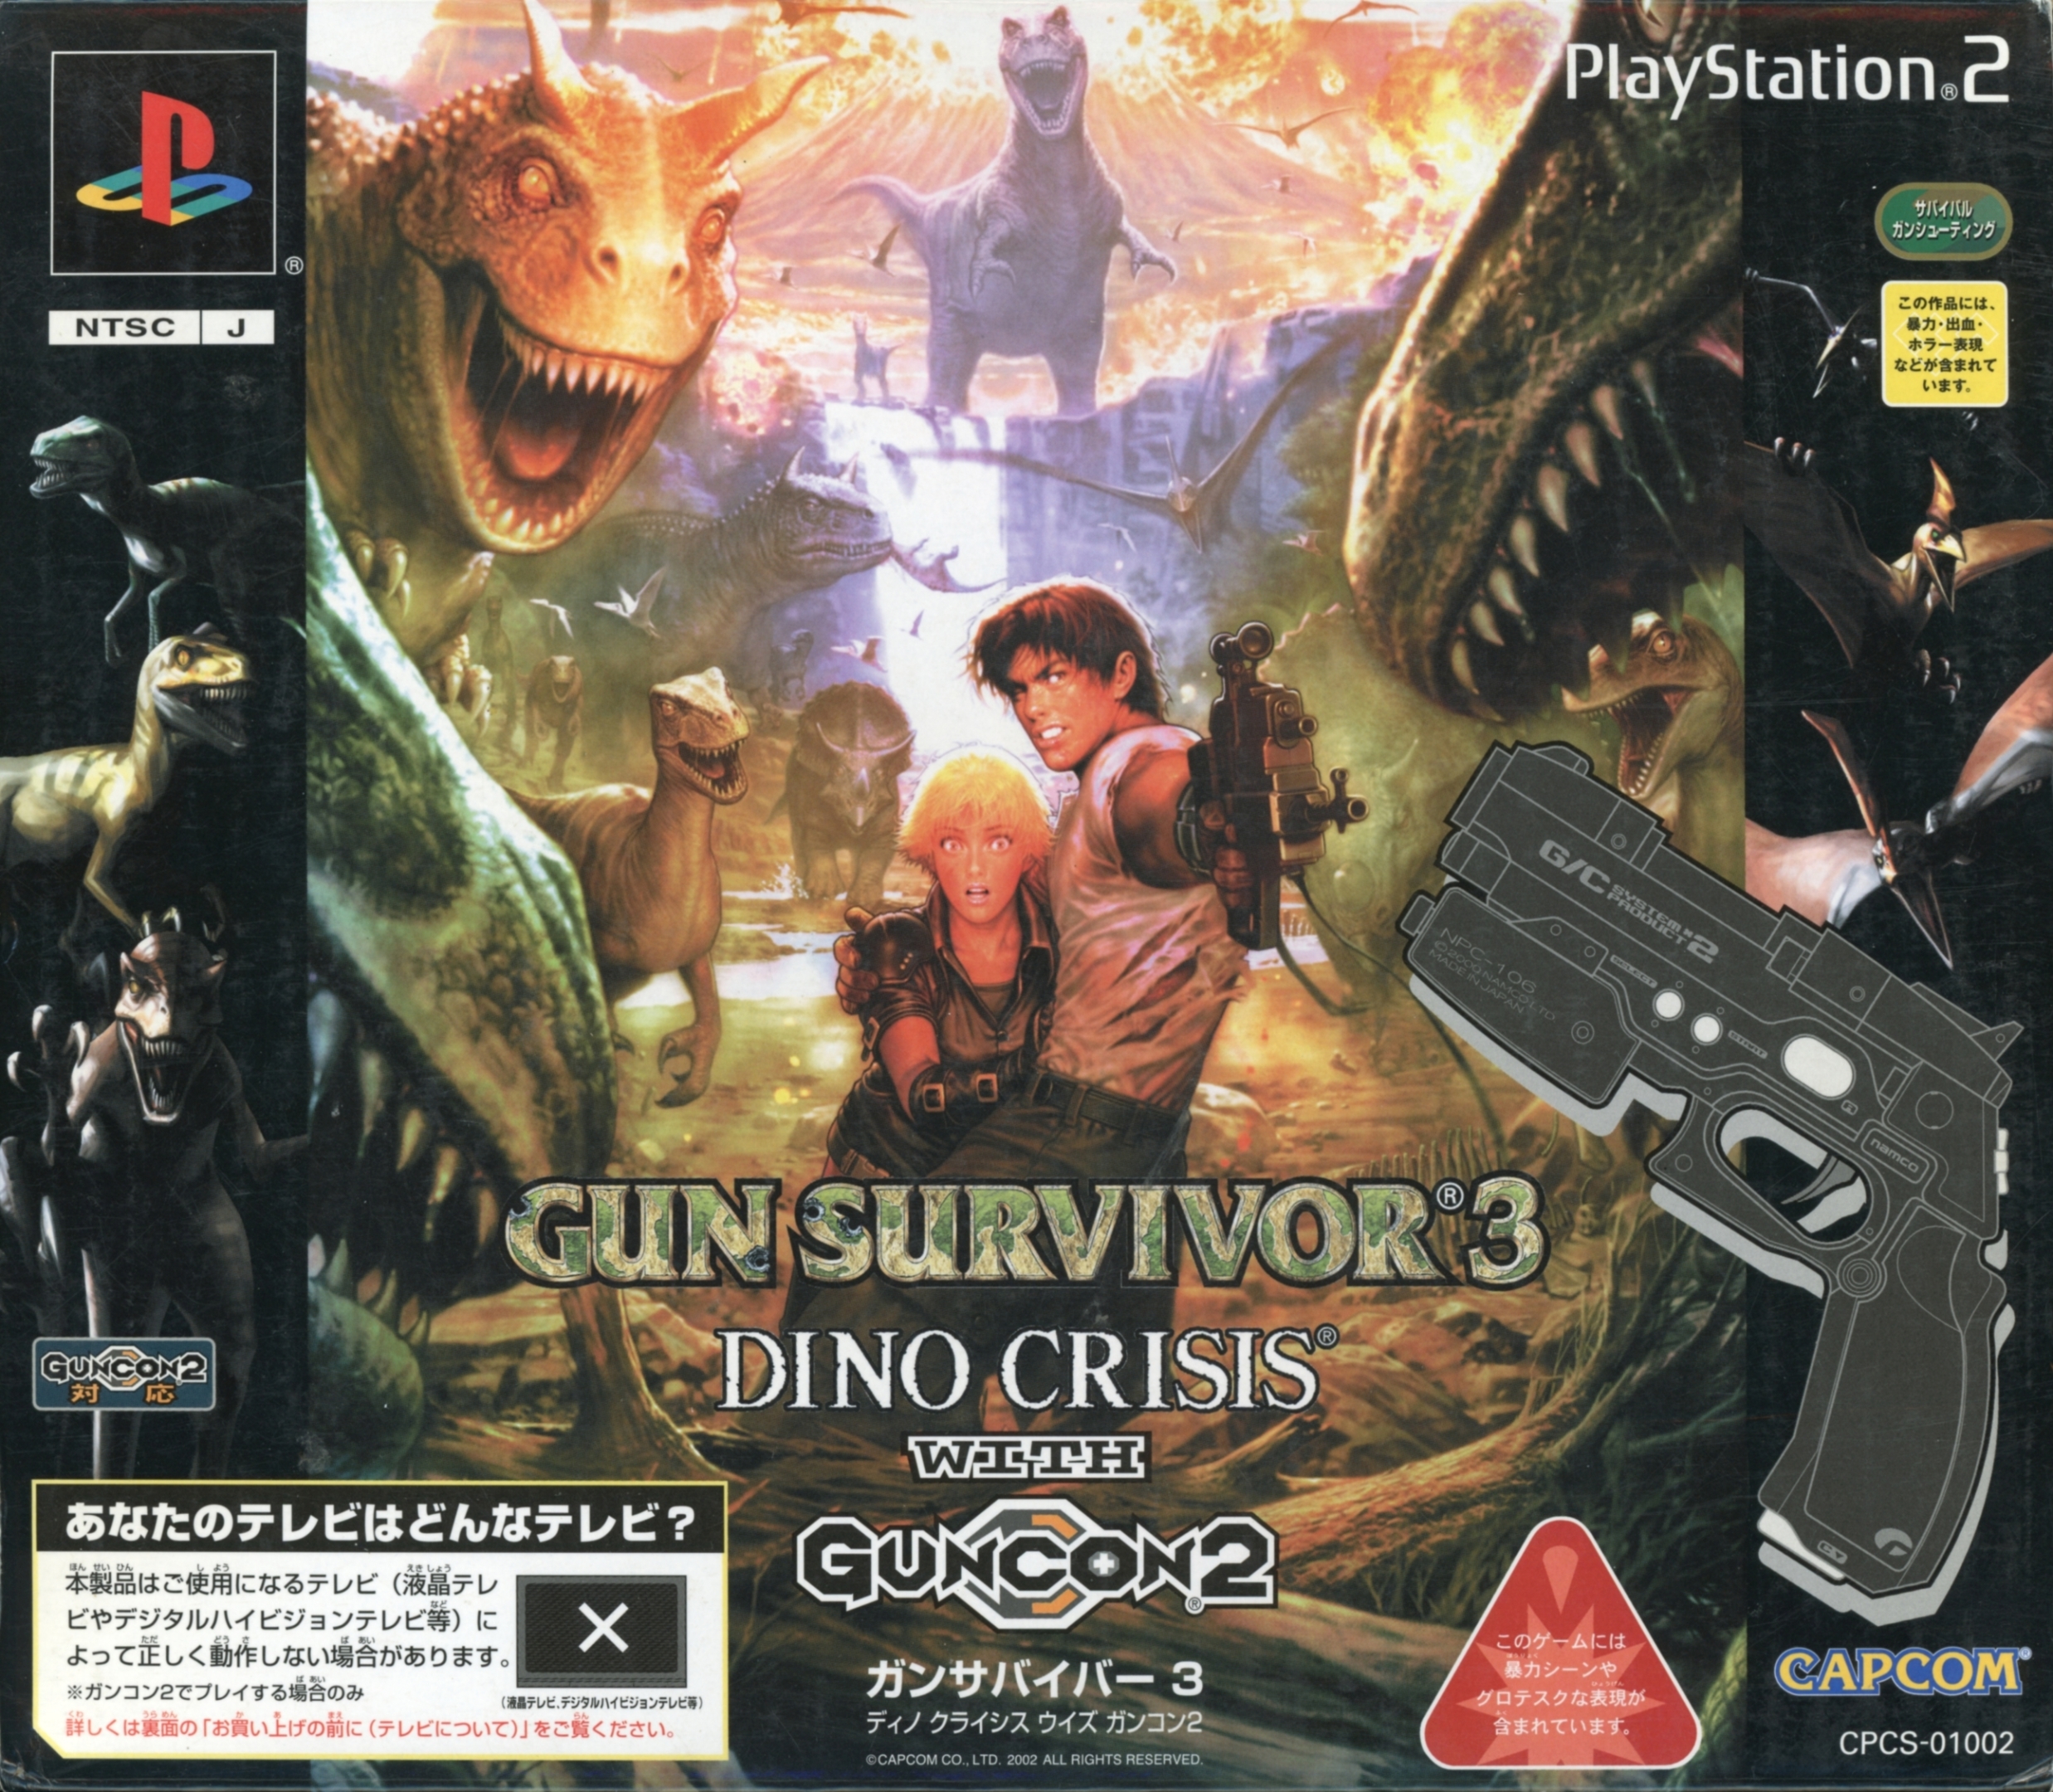 Dino Stalker (Sony Playstation 2 PS2 Game)